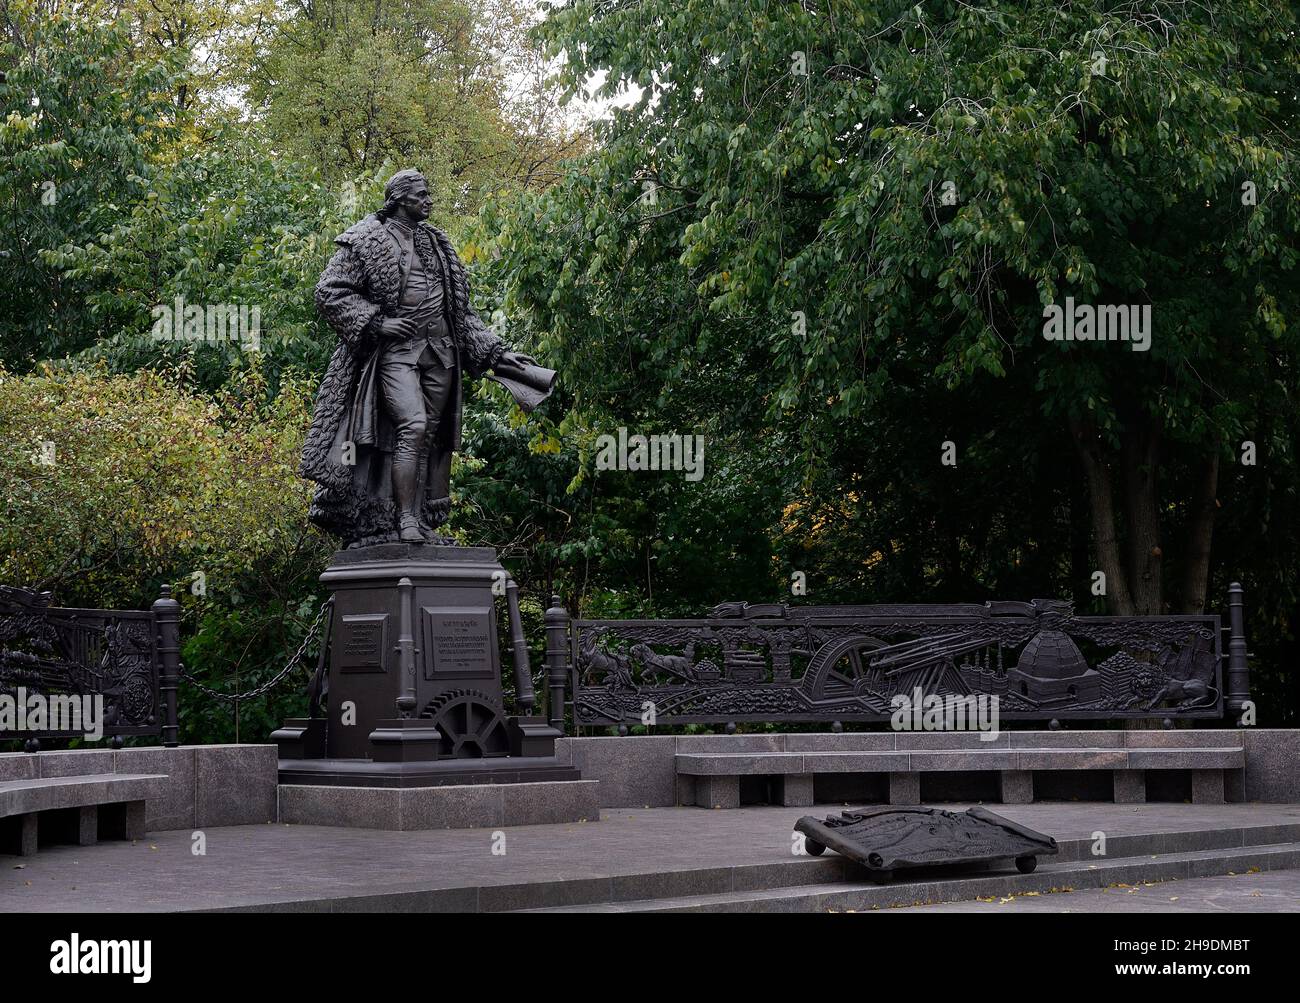 Petrozavodsk, Russia – September 20, 2021: monument to British industrialist Charles Gascoigne in Petrozavodsk, Russia Stock Photo